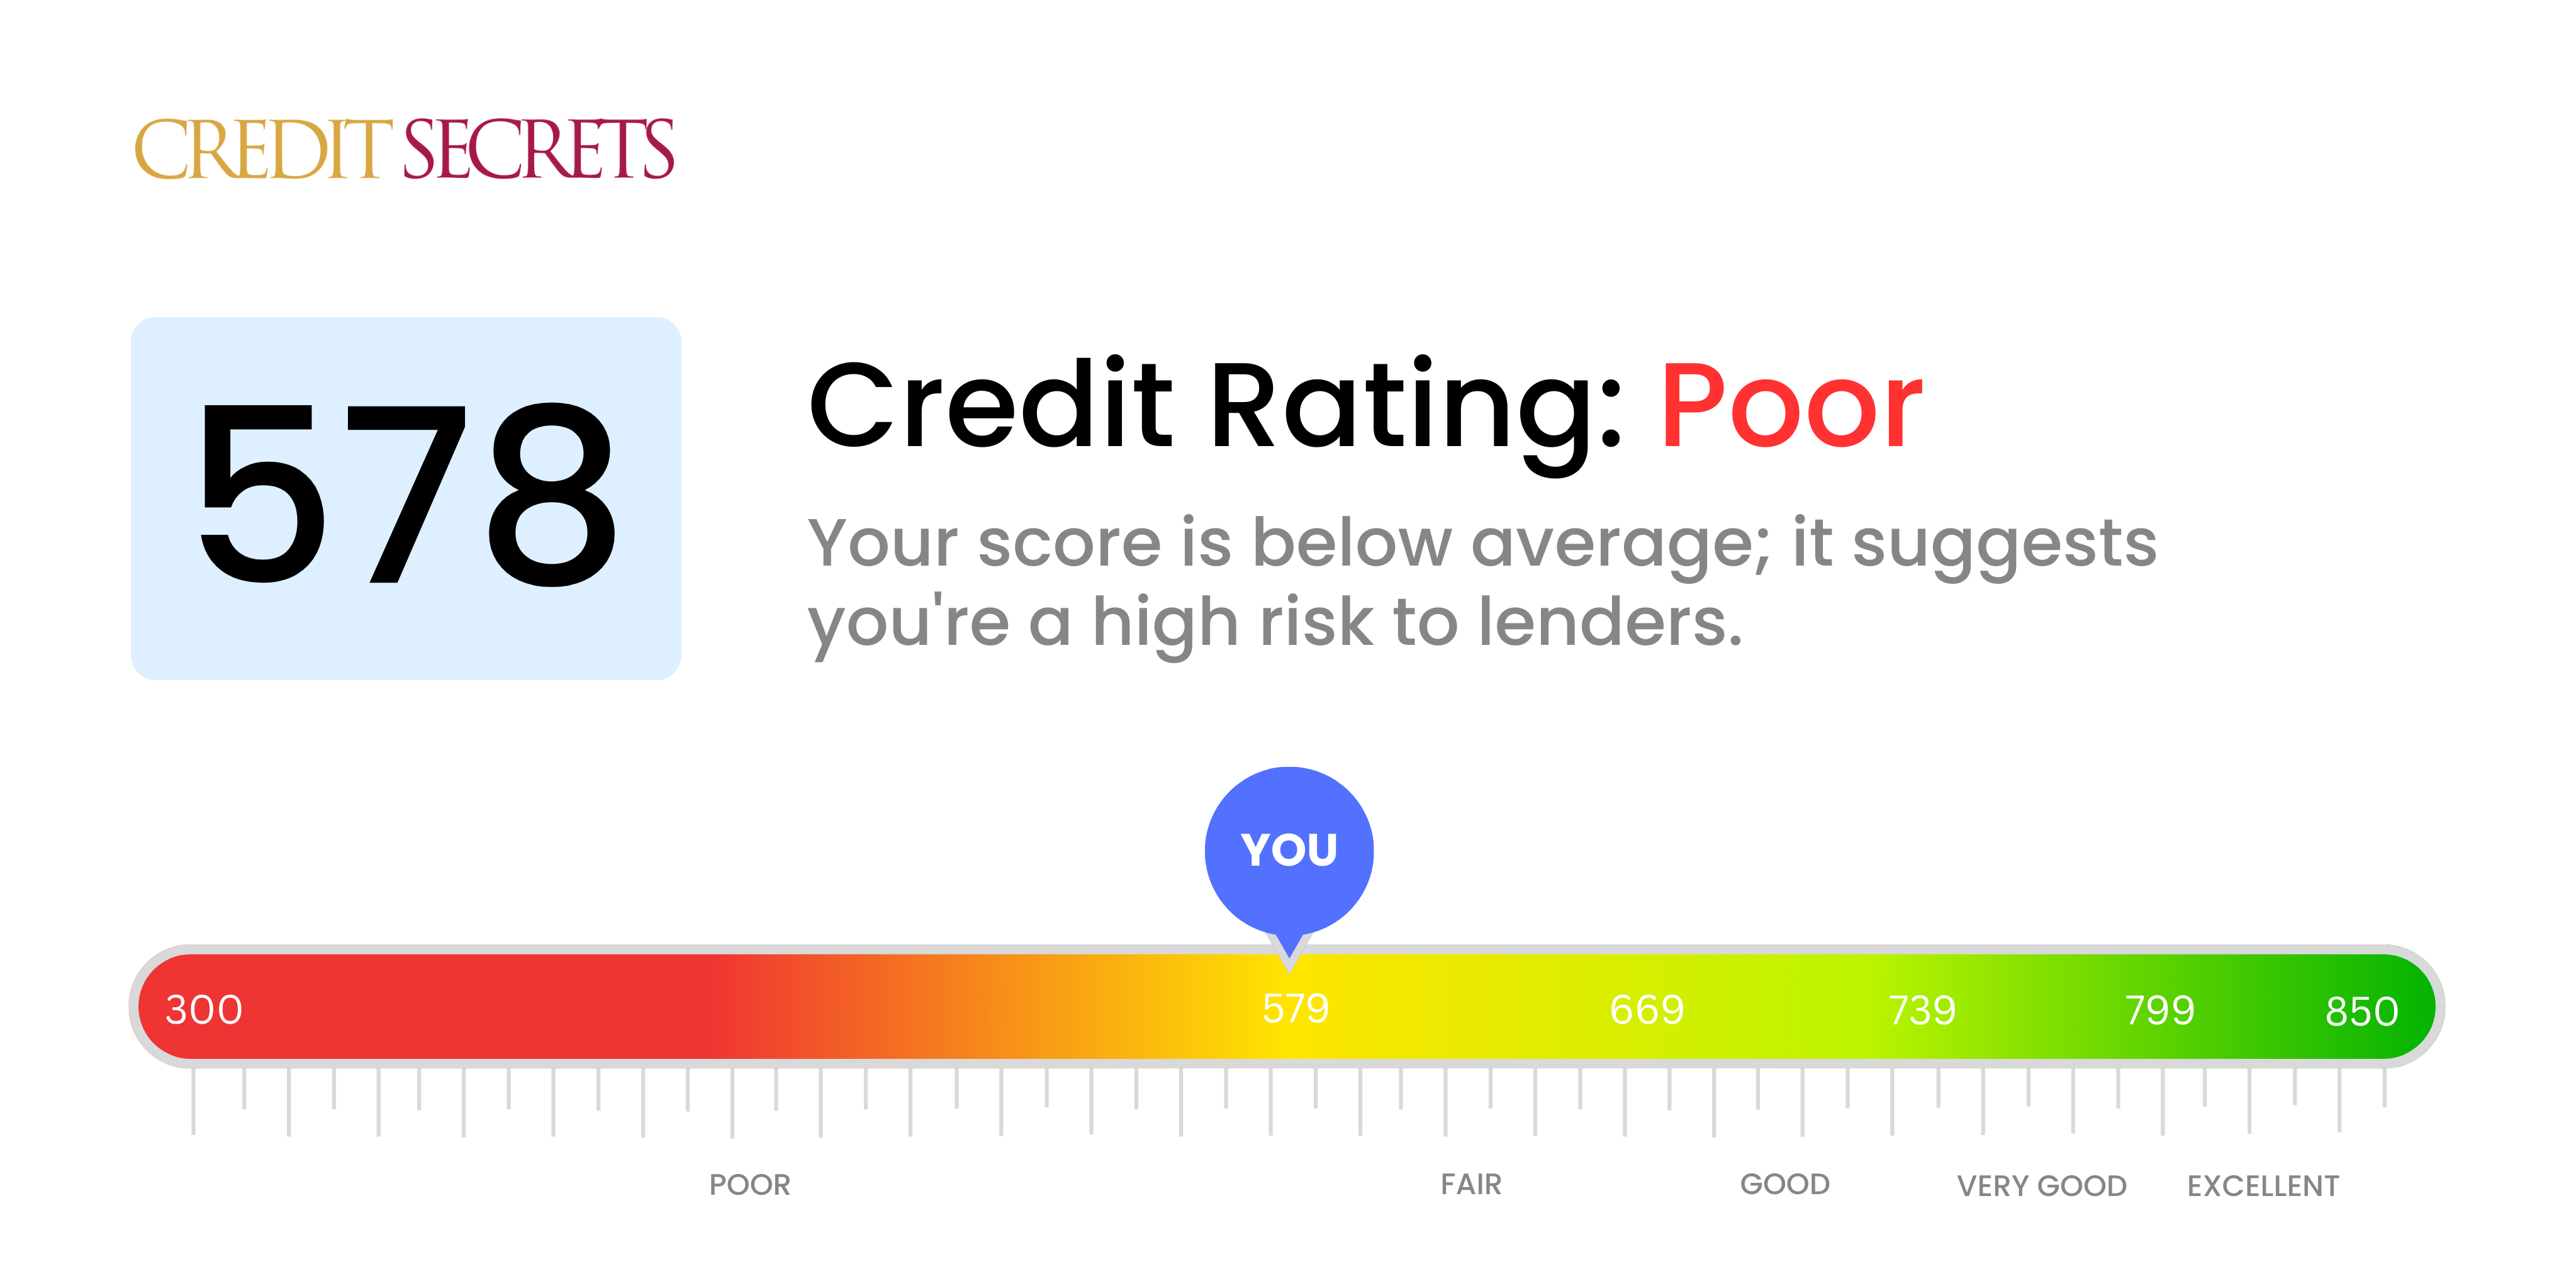 Is 578 a good credit score?